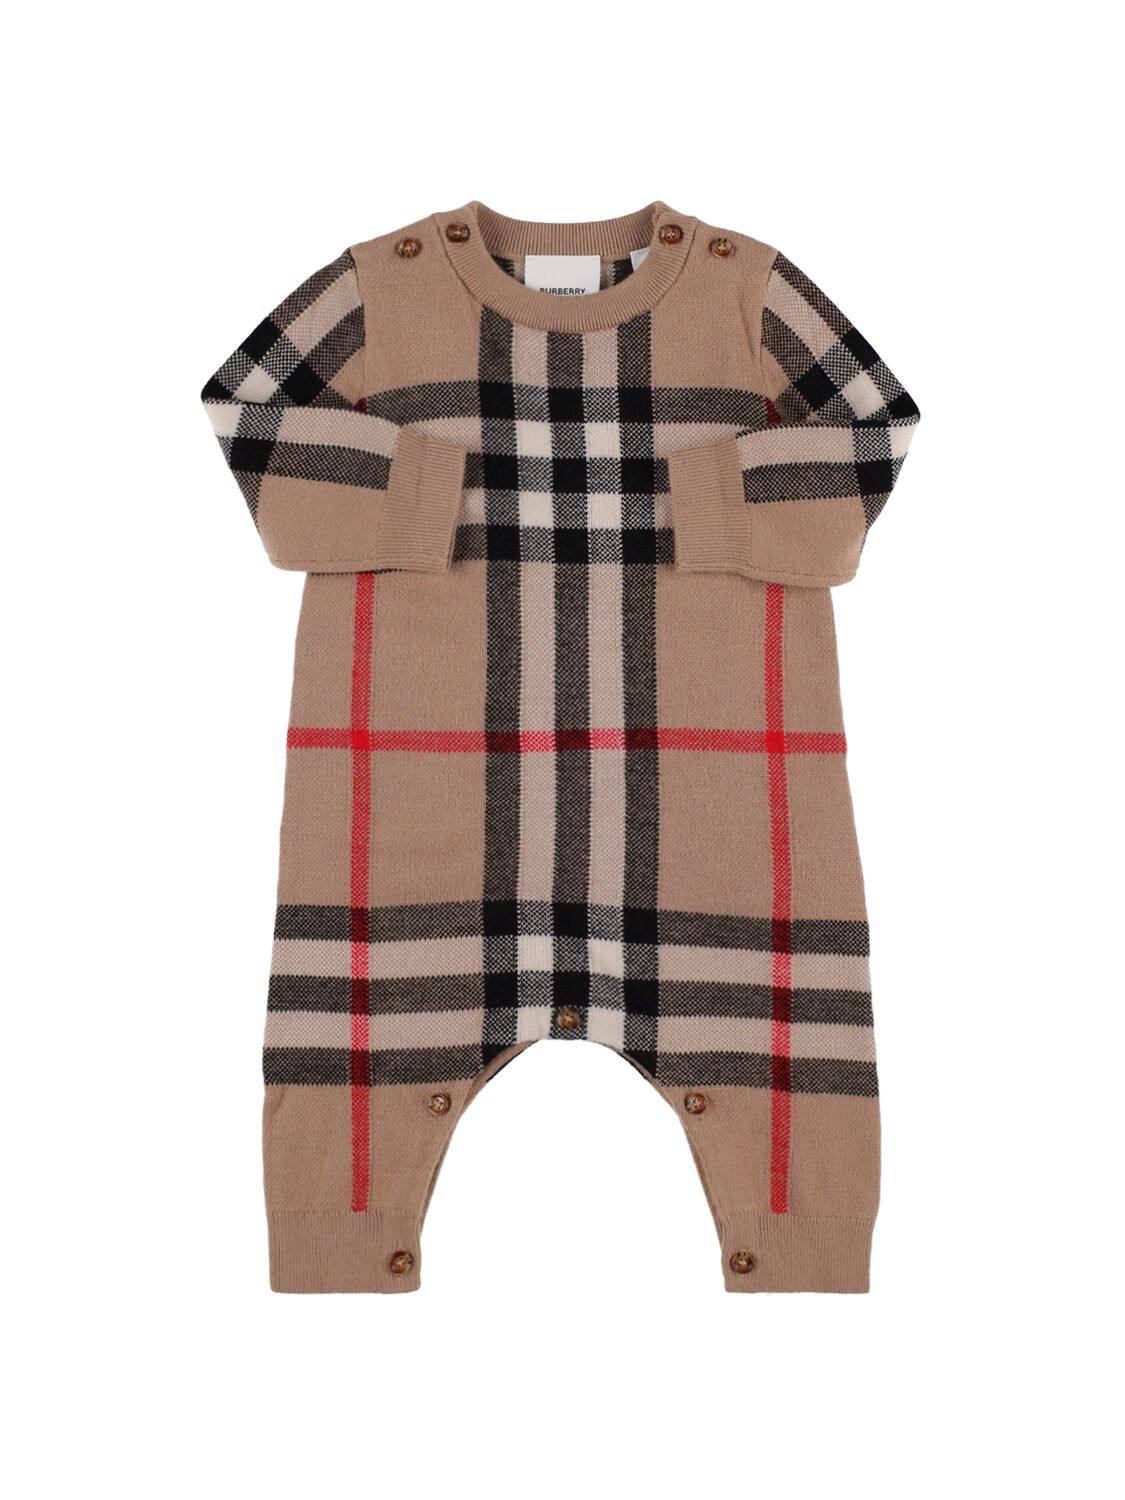 Burberry Babies' Check Print Wool & Cashmere Romper In Brown